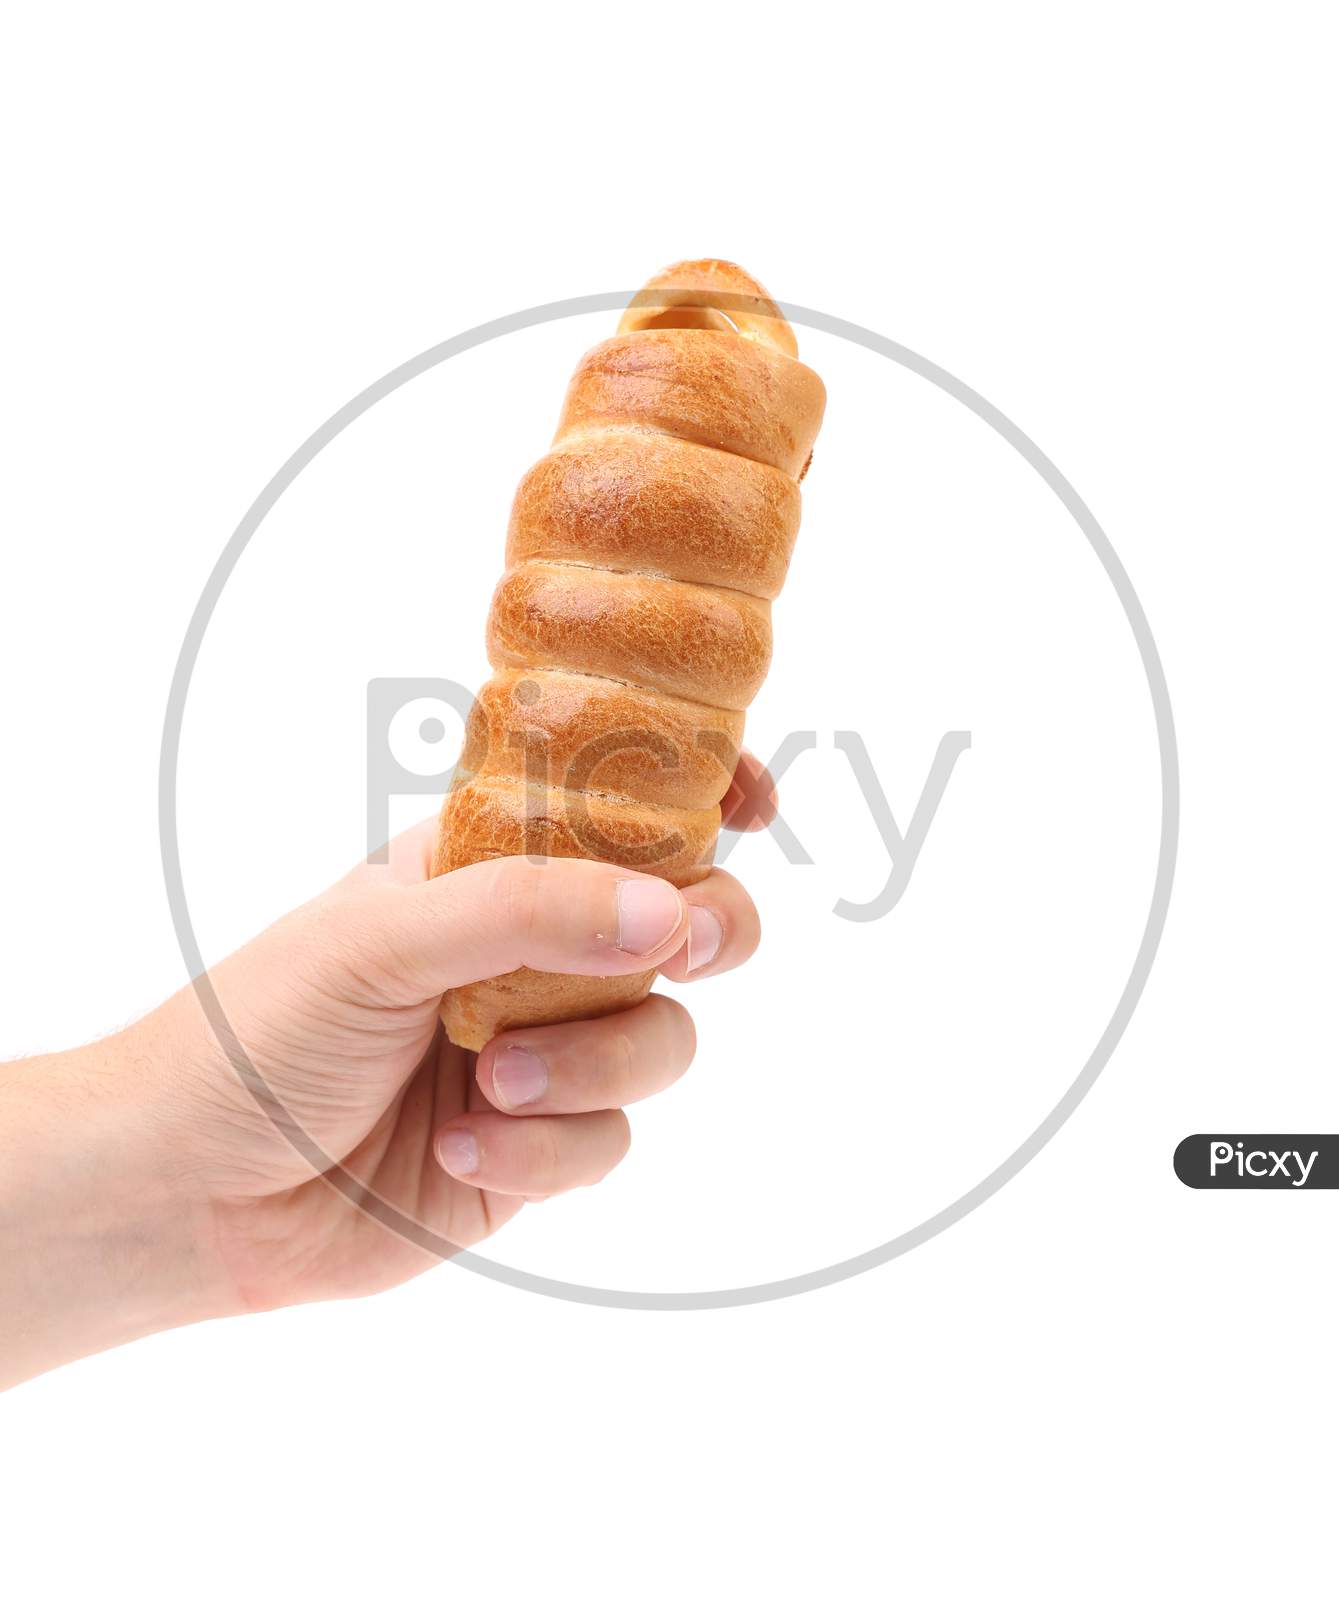 Hand Holds Hot Dog Baked. Isolated On A White Background.